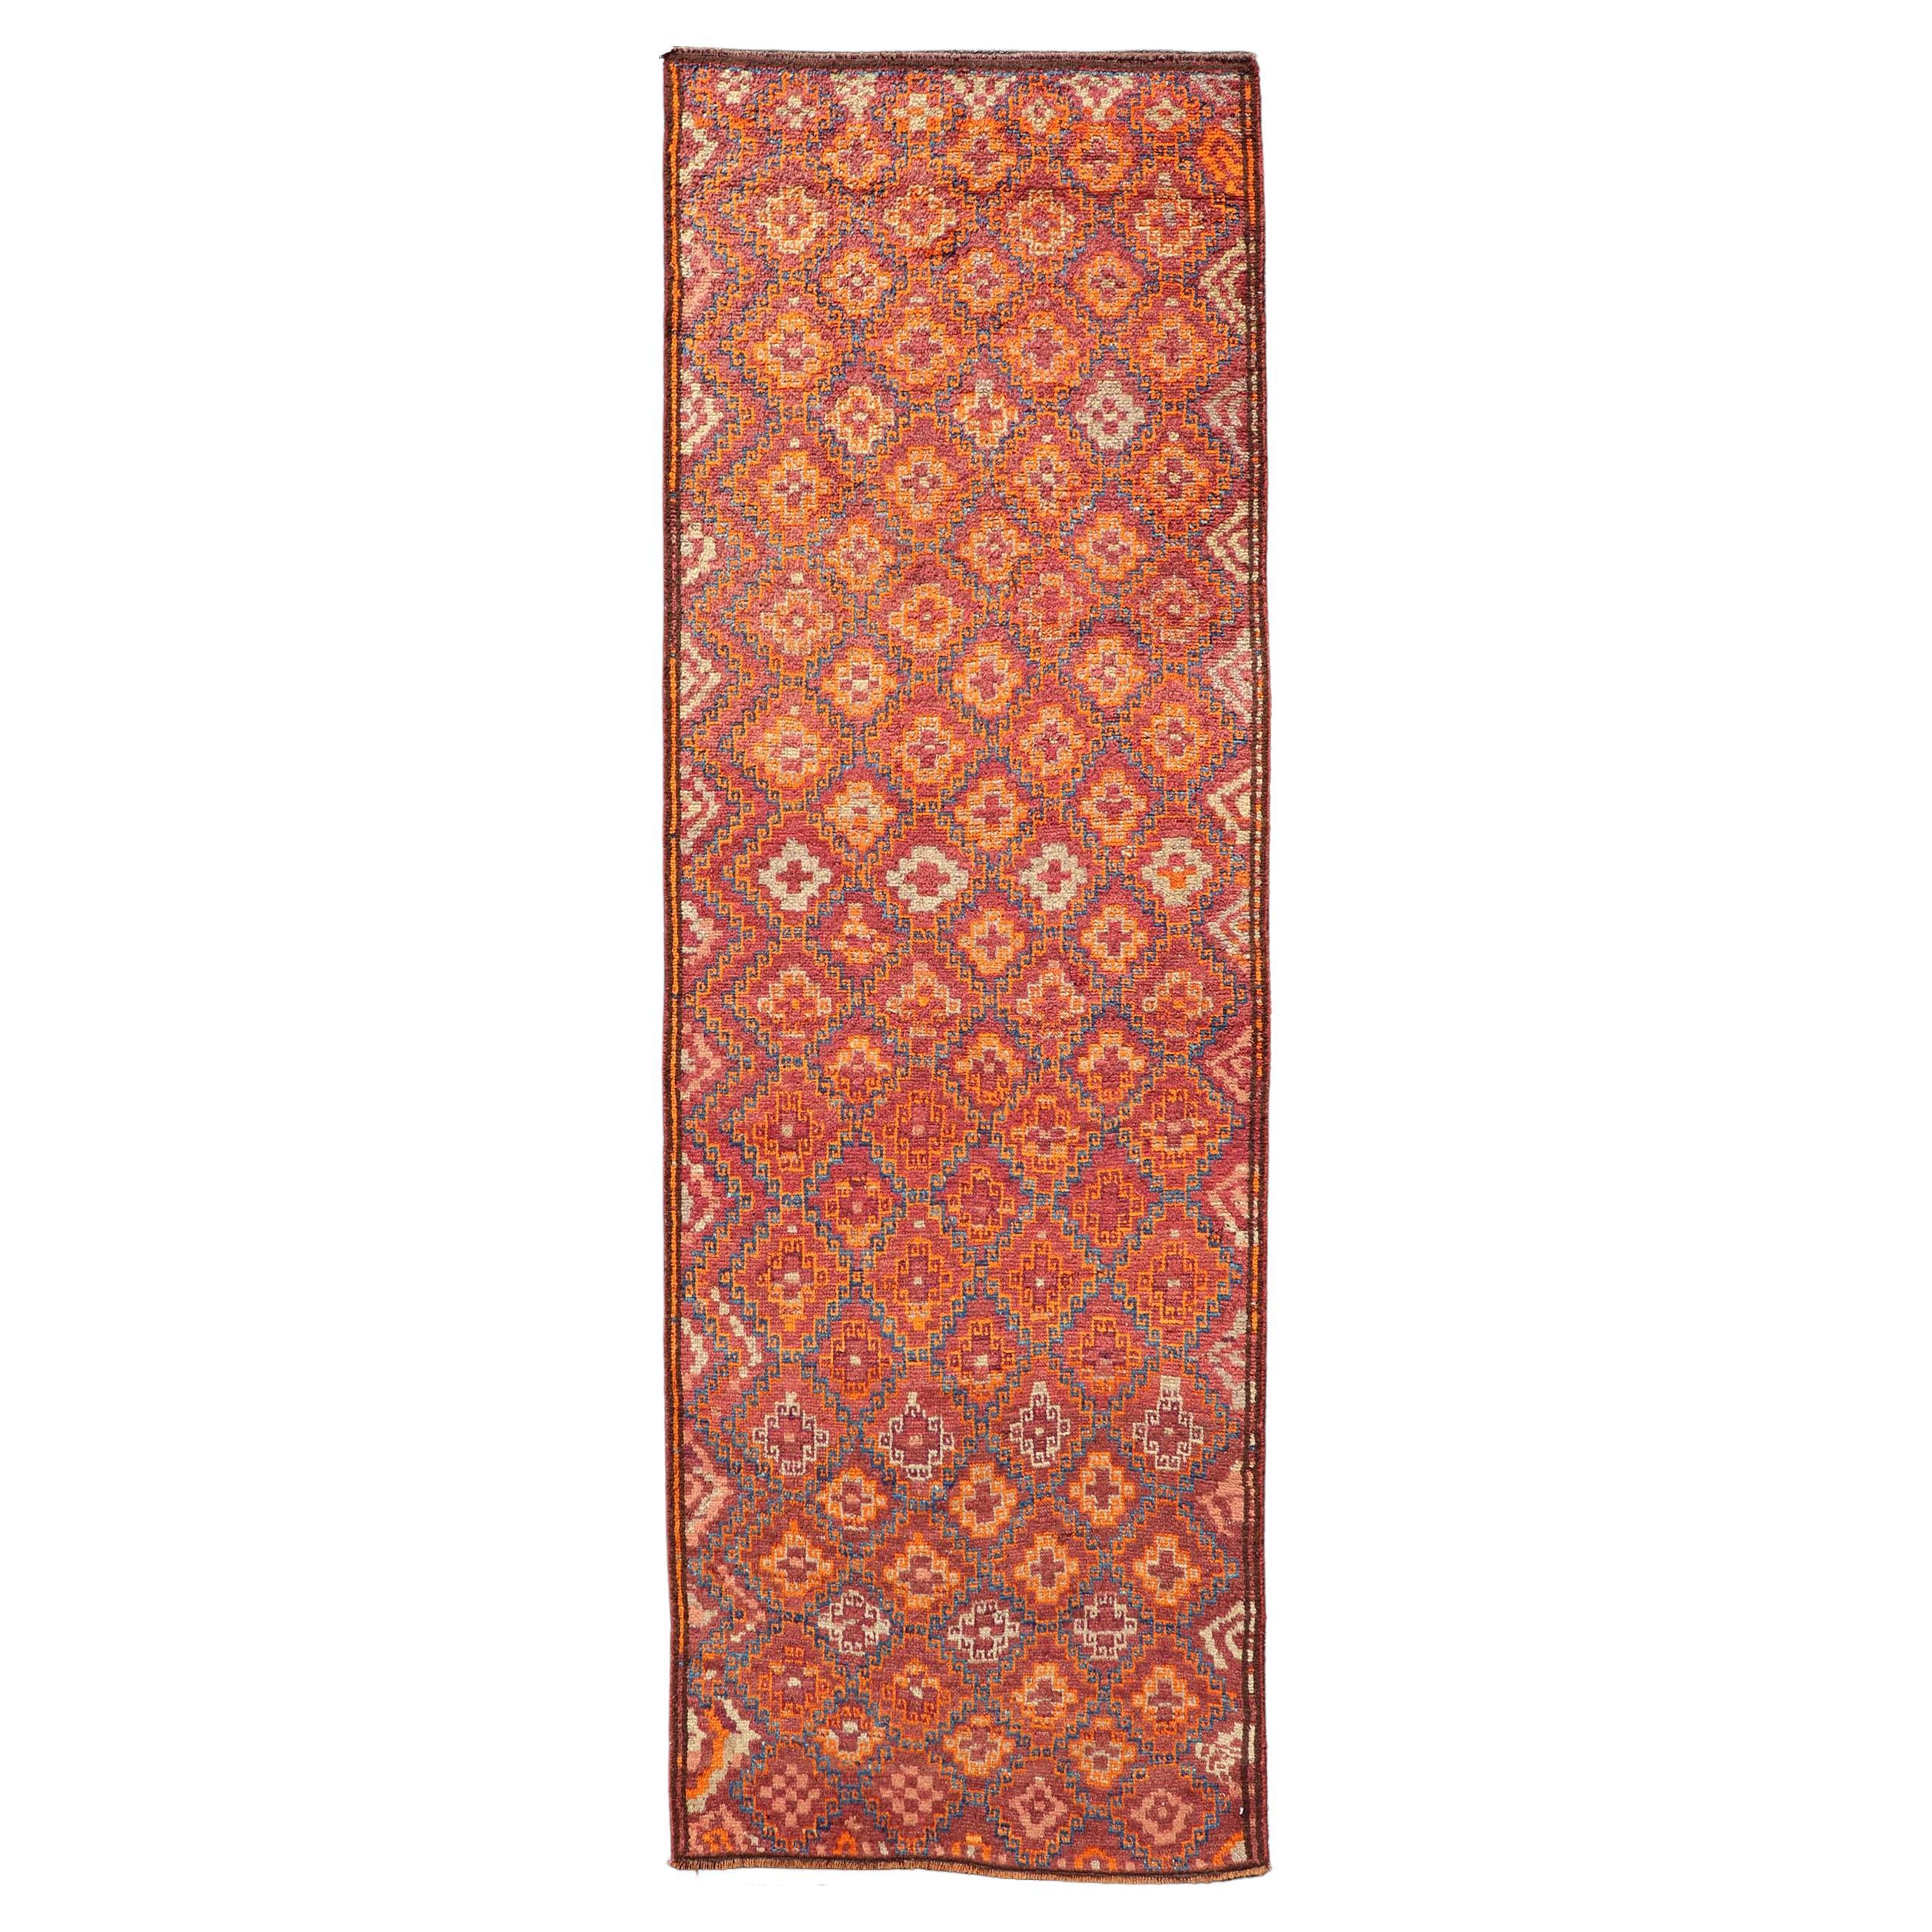 Antique Hand-Knotted Baluch Tribal Runner with All-Over Geometric Diamond Design For Sale